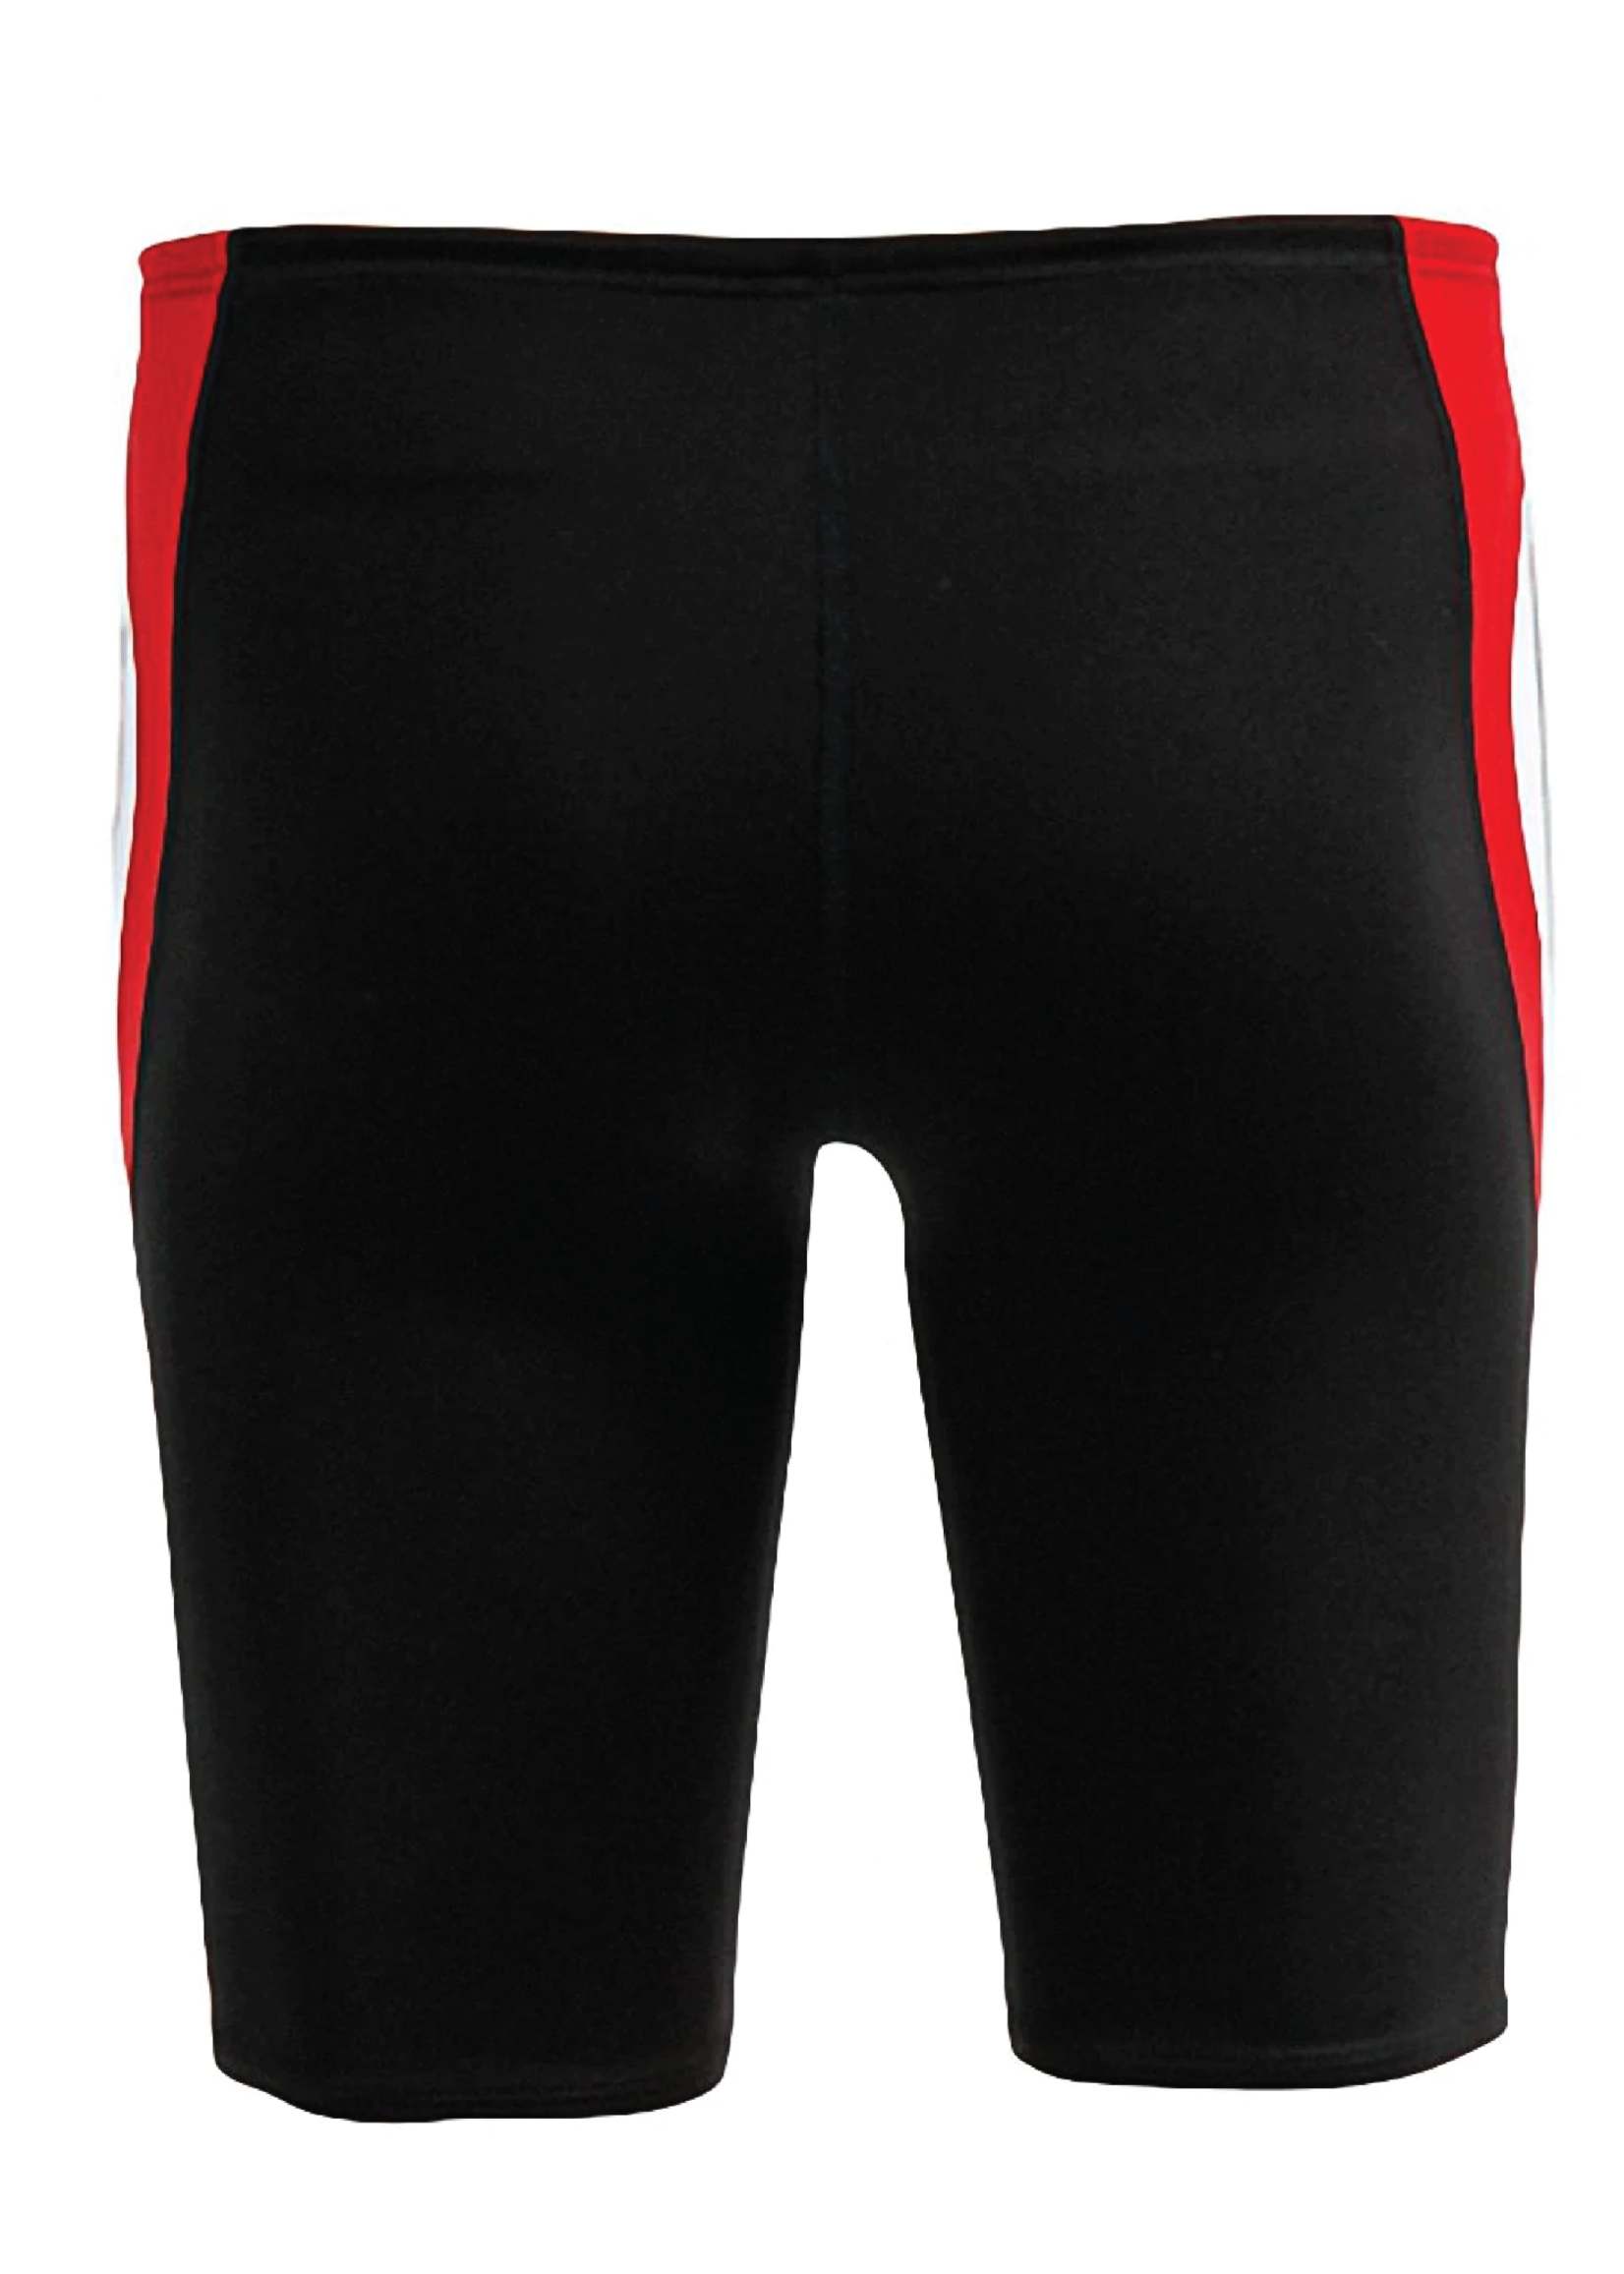 RELIANCE Colorblock Jammer 721 Black/Red/White